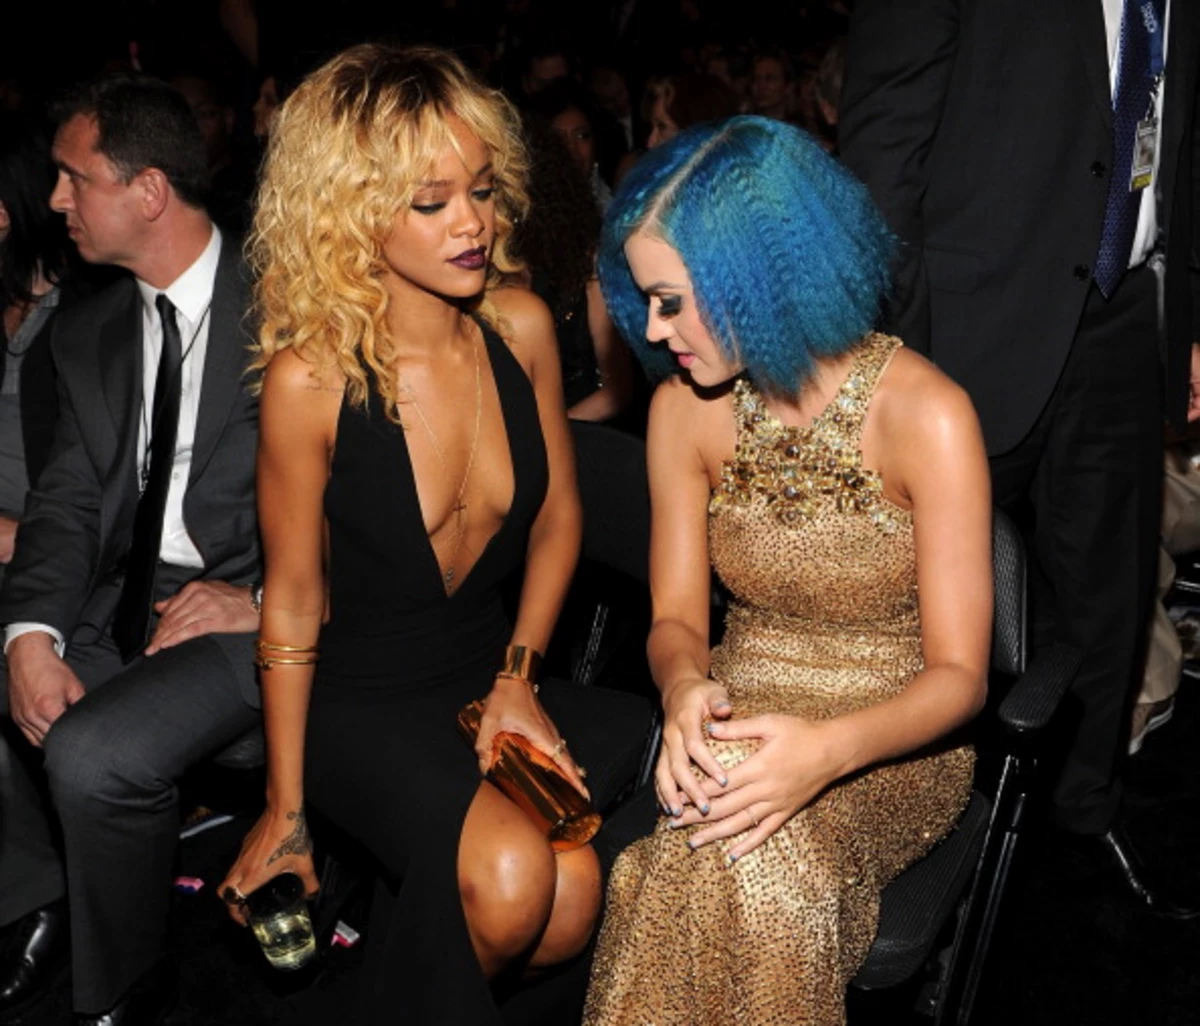 Katy Perry Hot Porn - Why Is Katy Perry Starring At Rihanna's Chest? [Photos]